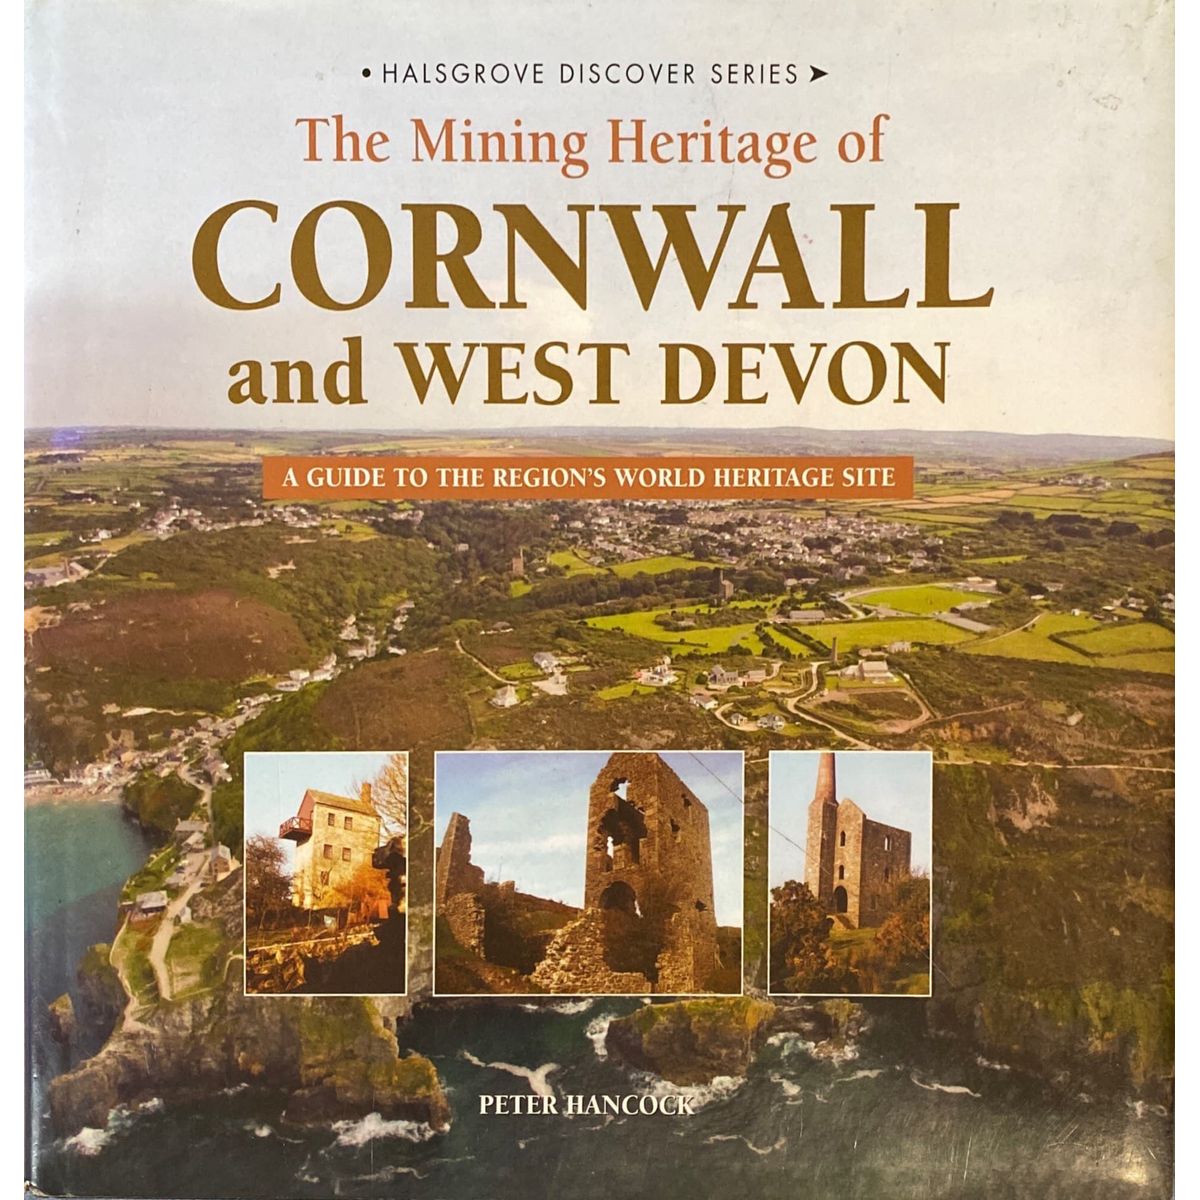 ISBN: 9781841147536 / 1841147532 - The Mining Heritage of Cornwall and West Devon: A Guide to the Region's World Heritage Site by Peter Hancock [2008]